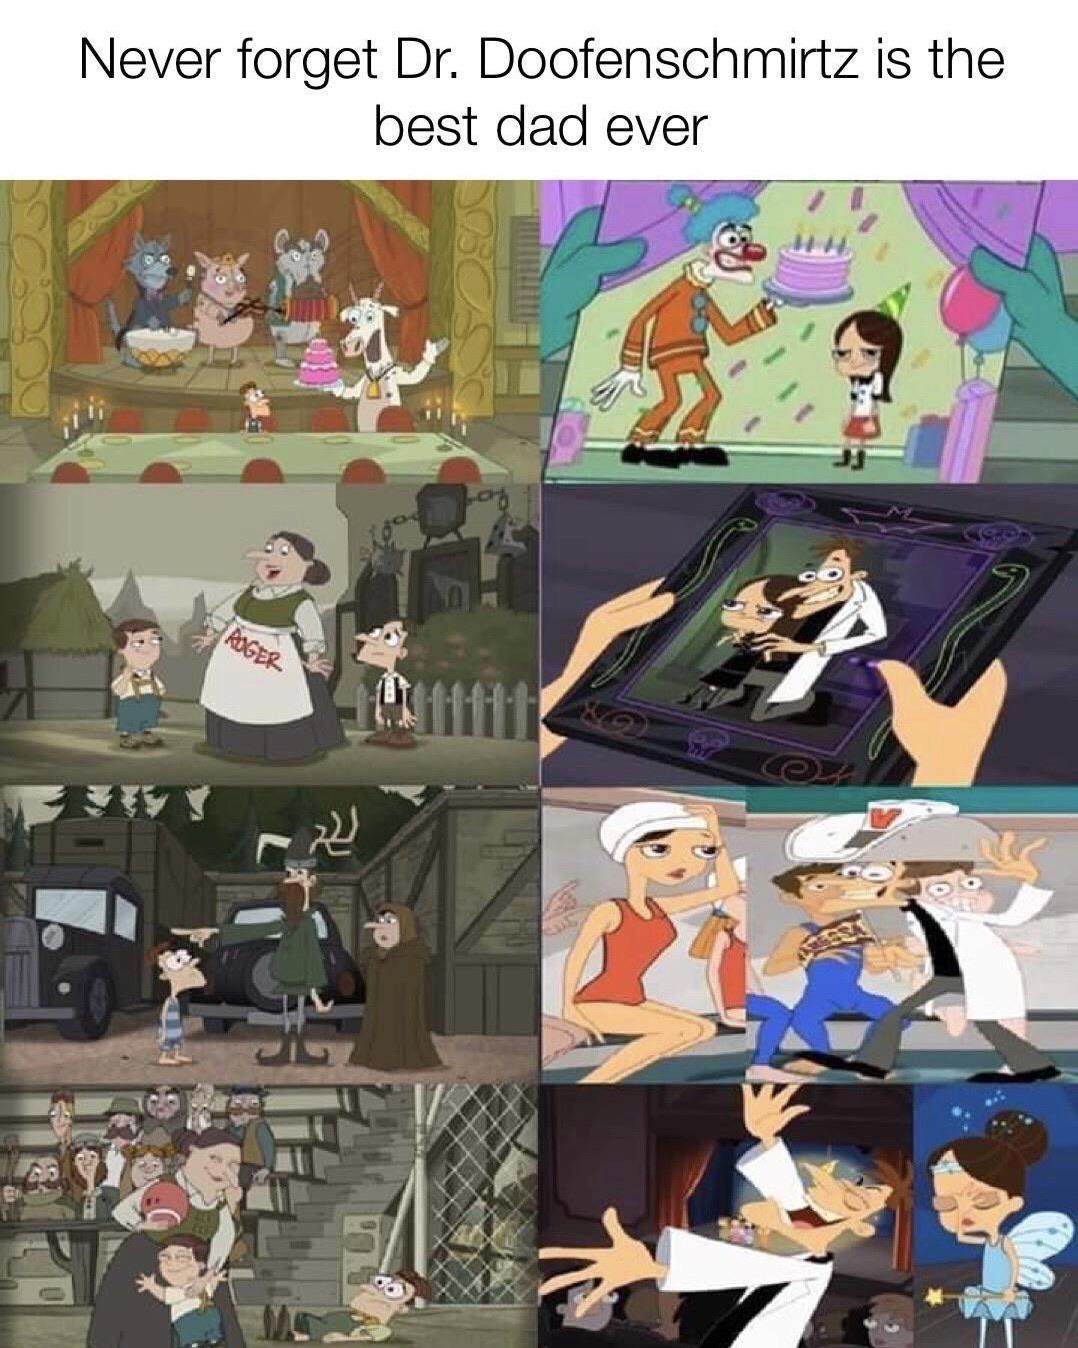 Wholesome memes, Vanessa, Tiger King, Norm, Doof, Phineas Wholesome Memes Wholesome memes, Vanessa, Tiger King, Norm, Doof, Phineas text: Never forget Dr. Doofenschmirtz is the best dad ever 